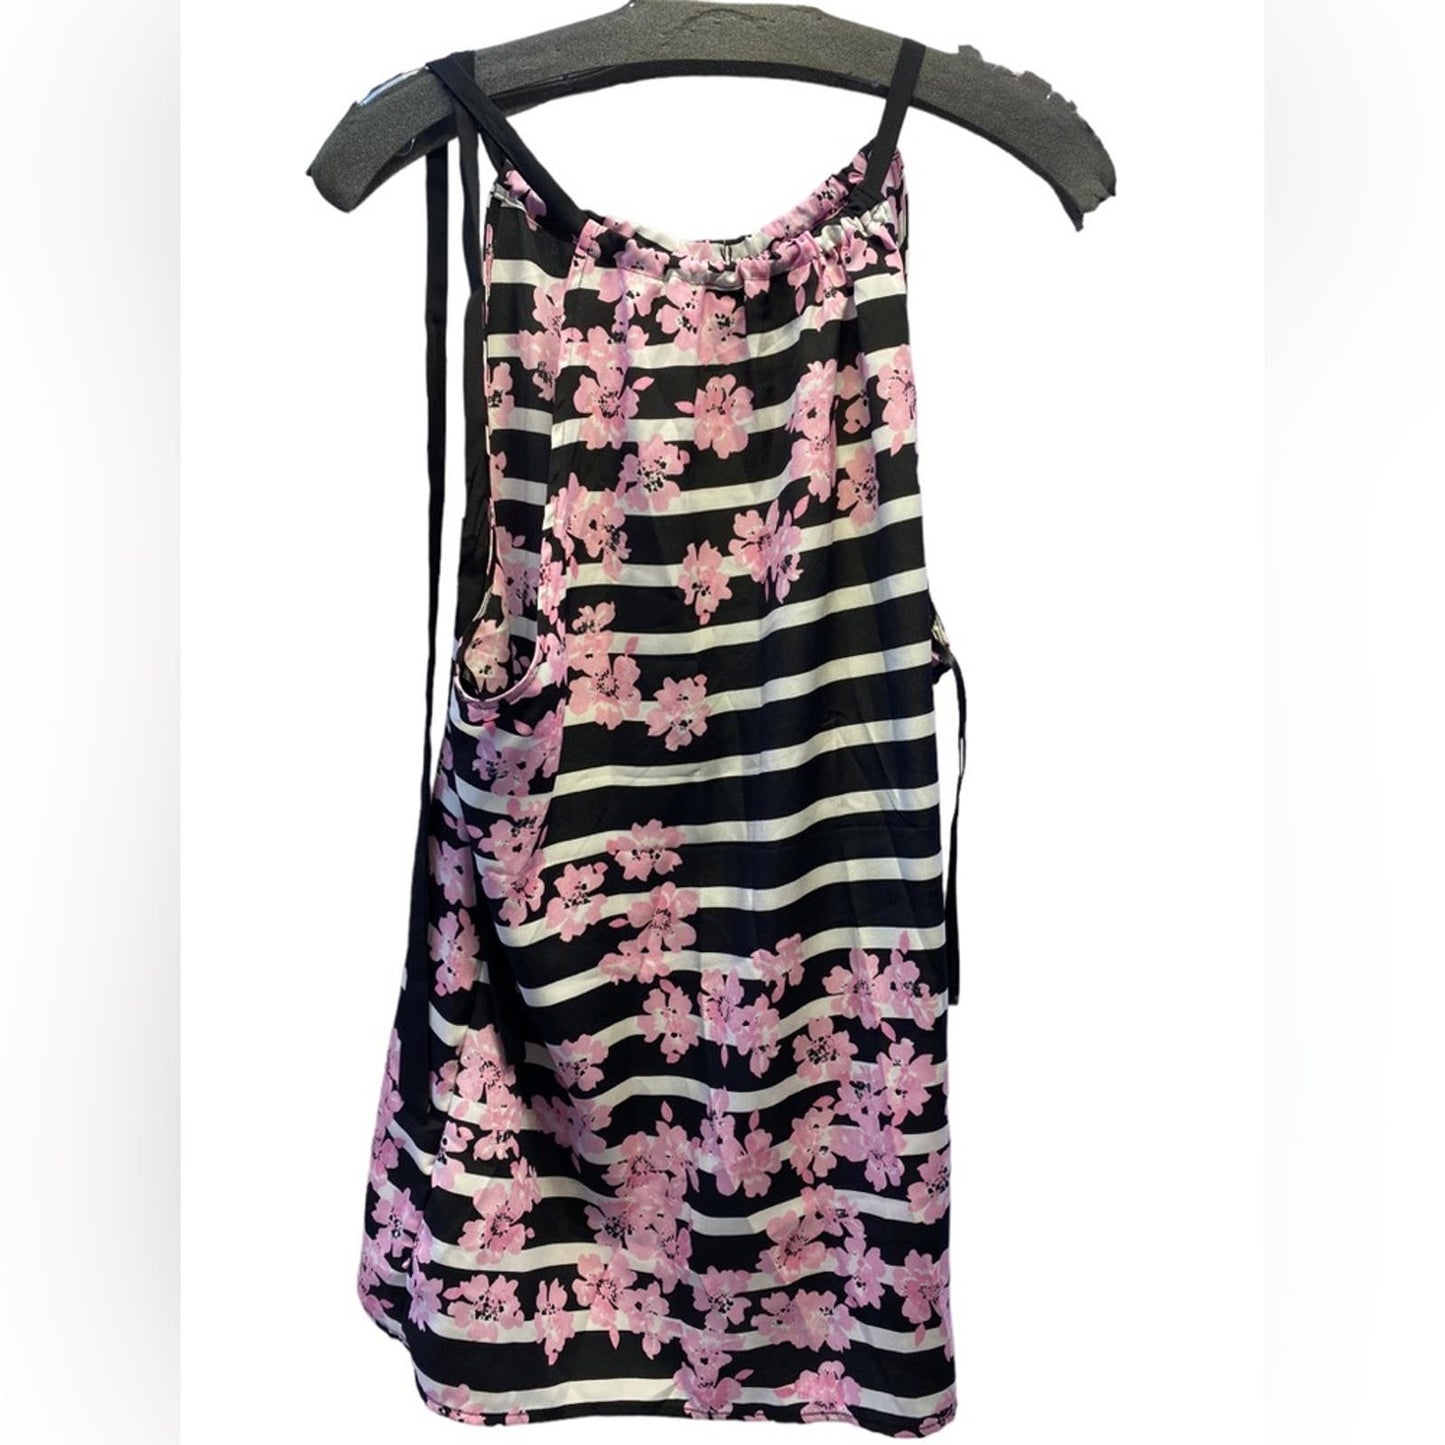 New York & Company Black White Stripes with Pink Floral print Tank Top